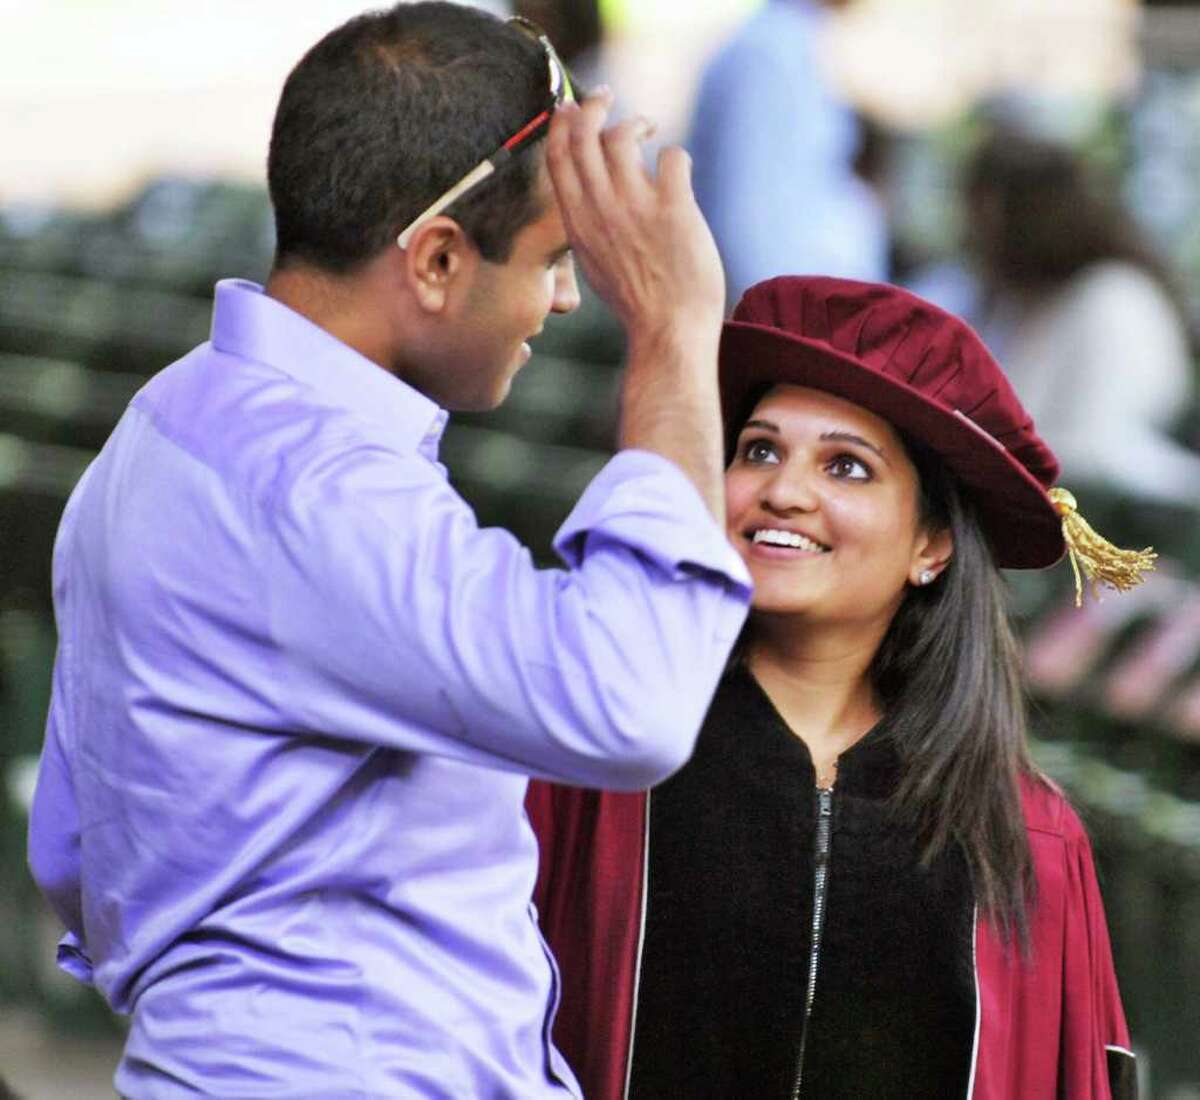 Rachna Patel of Long Island shares a moment with fiance Sid Subramony, left, of New Hampshire before the start of the 173rd Albany Medical College commencement ceremony at SPAC on Thursday. (John Carl D'Annibale / Times Union)